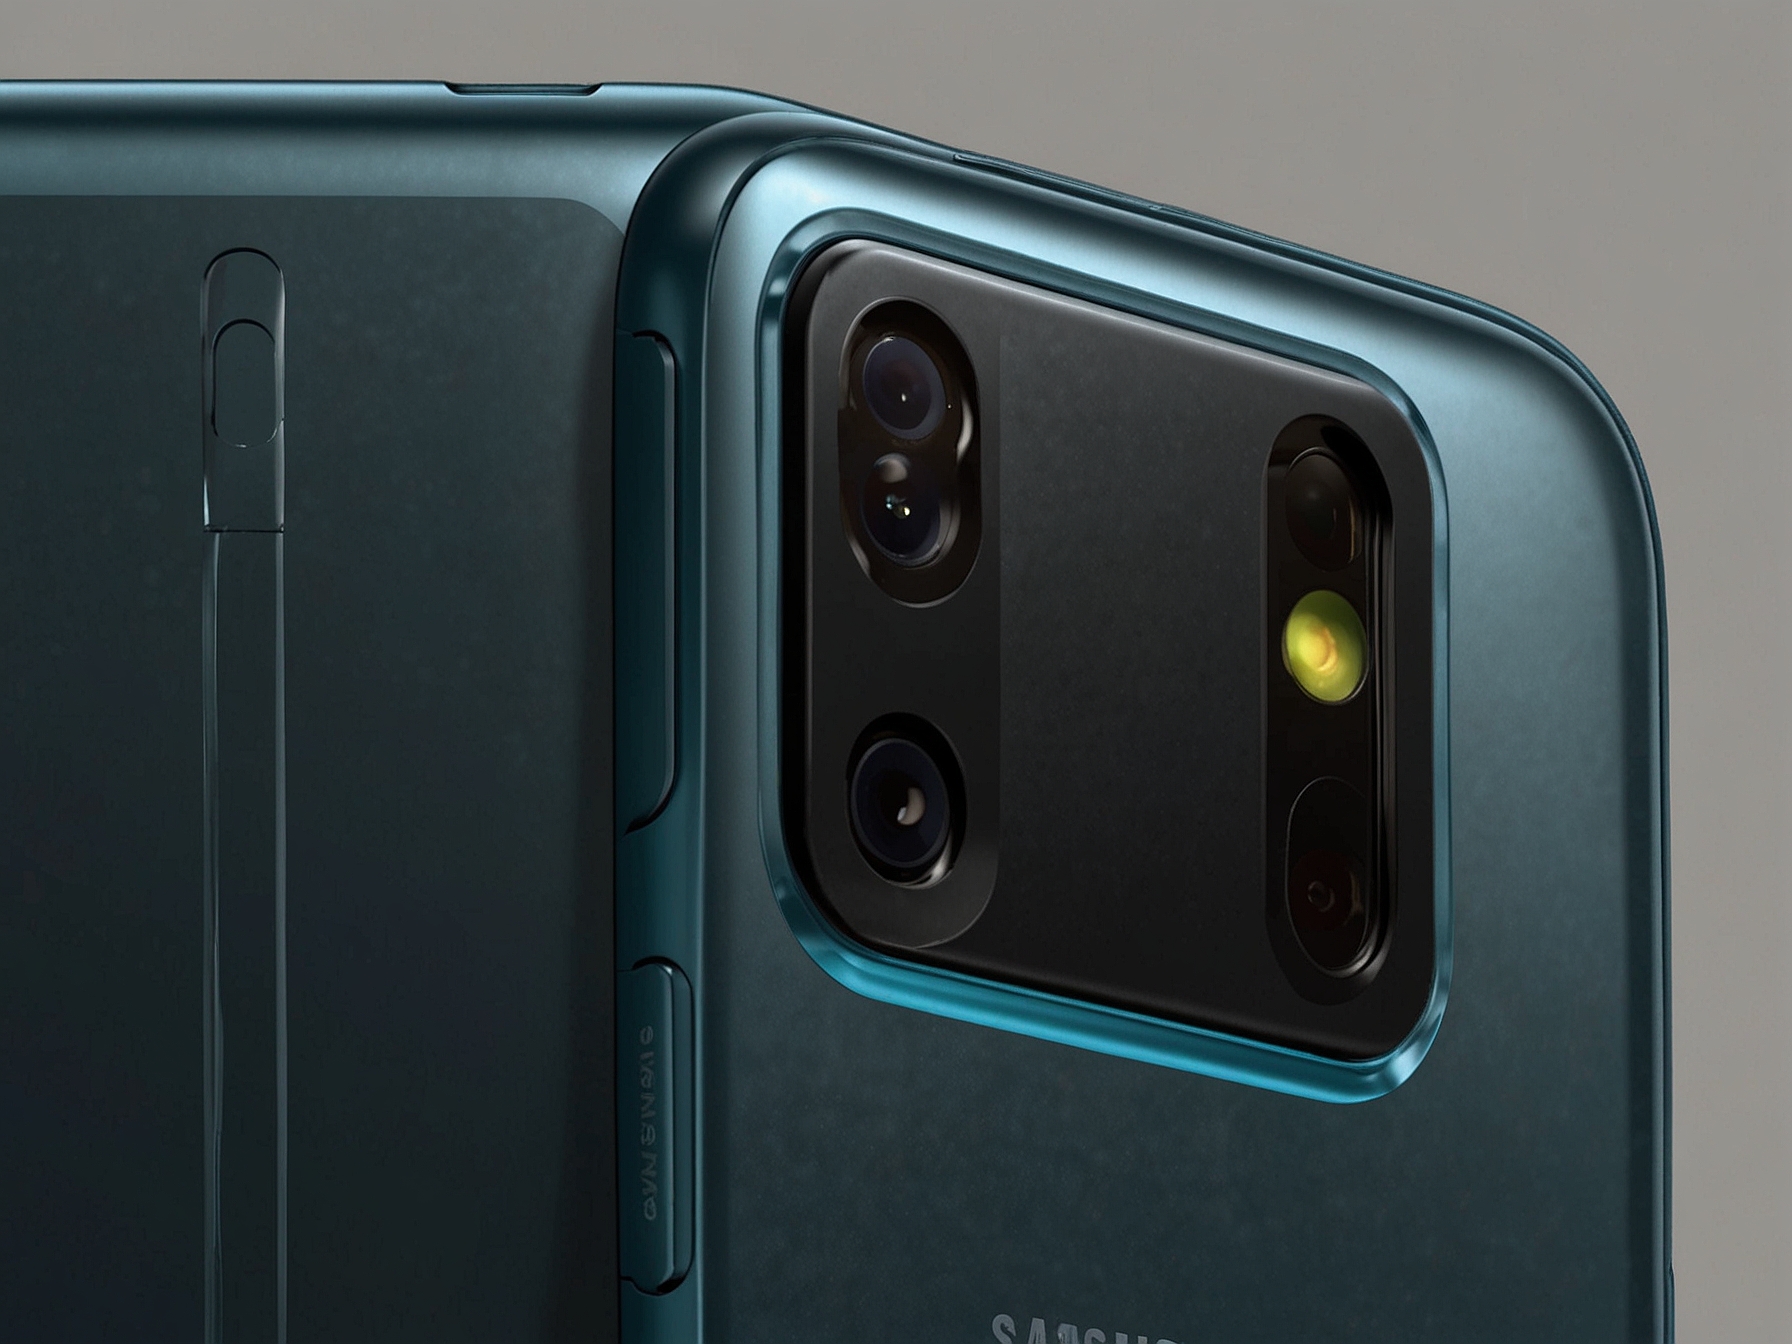 The rear view of Samsung Galaxy S24 FE render highlights its triple camera setup. The cameras are likely to include wide, ultra-wide, and telephoto lenses, offering users versatile photography options for various shooting scenarios.